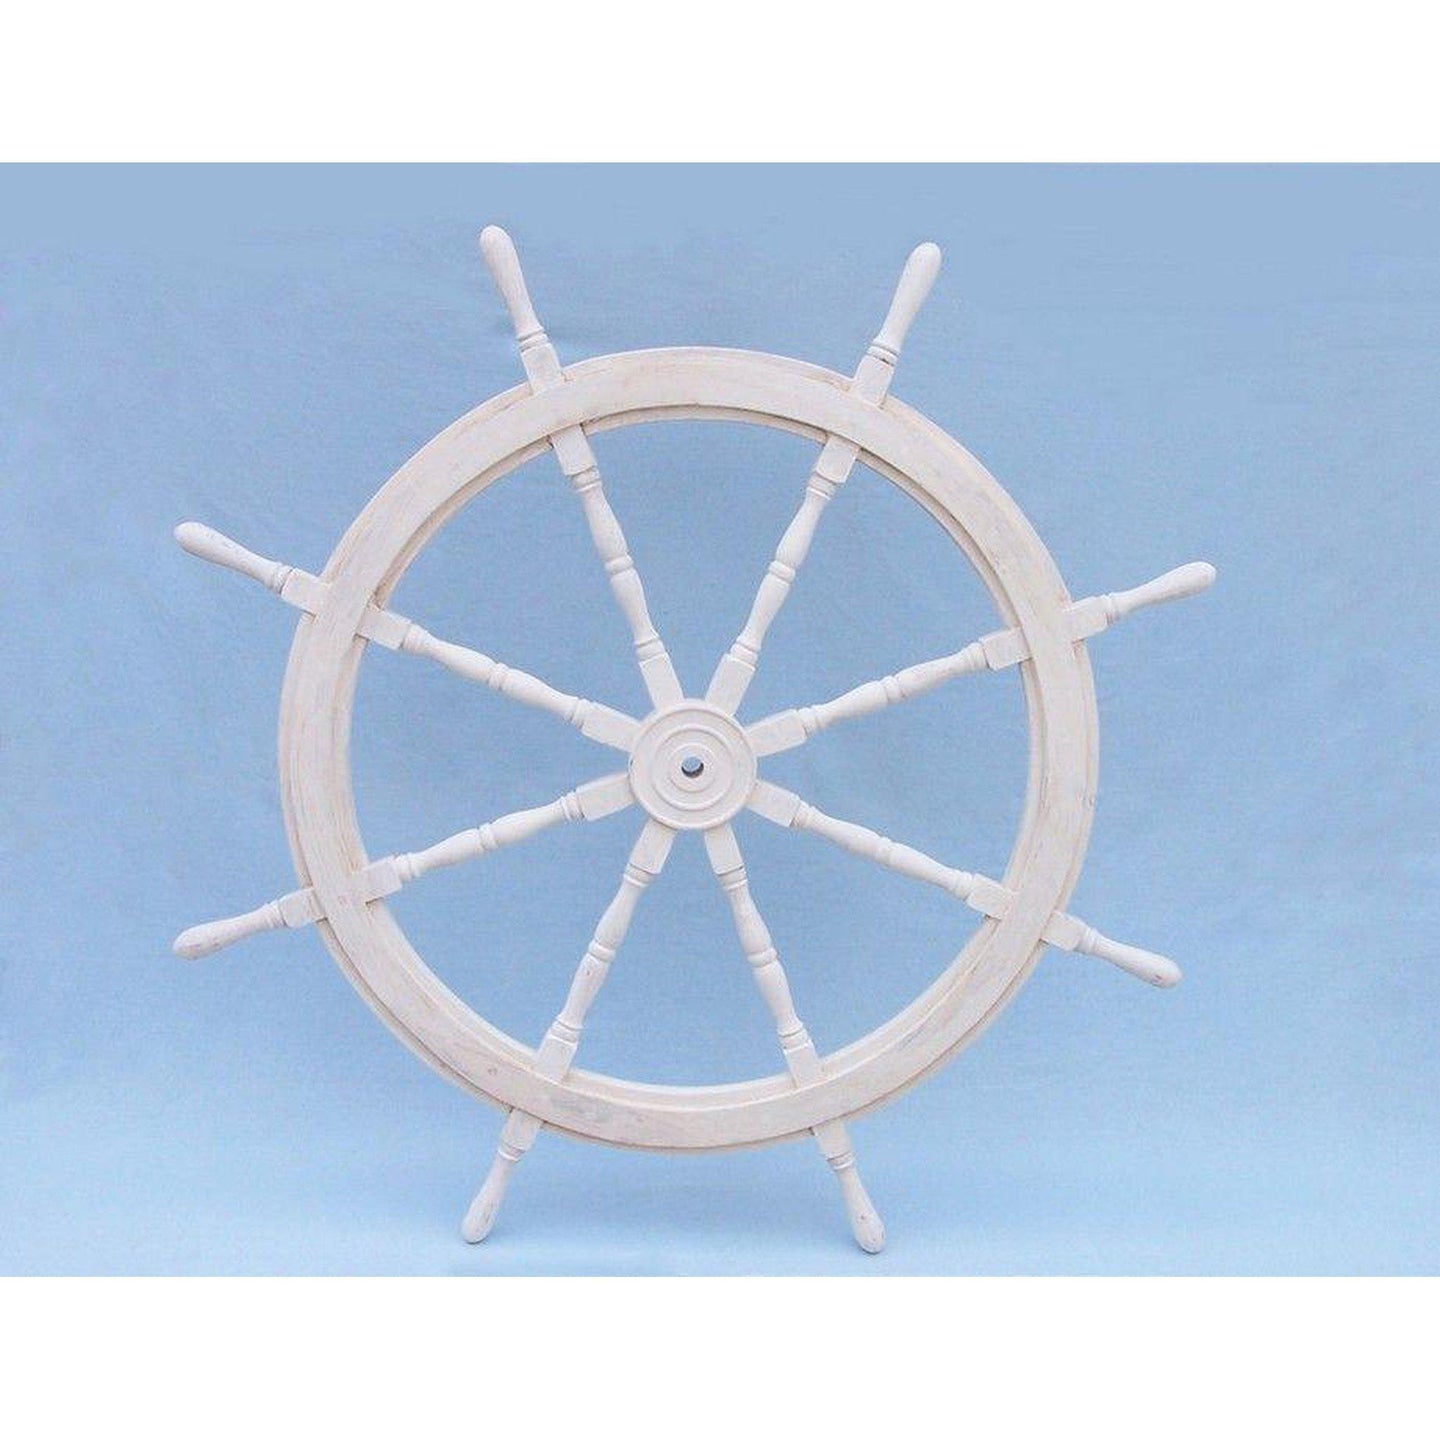 Handcrafted Model Ships Classic Wooden Whitewashed Decorative Ship Steering Wheel 60 SW-173160